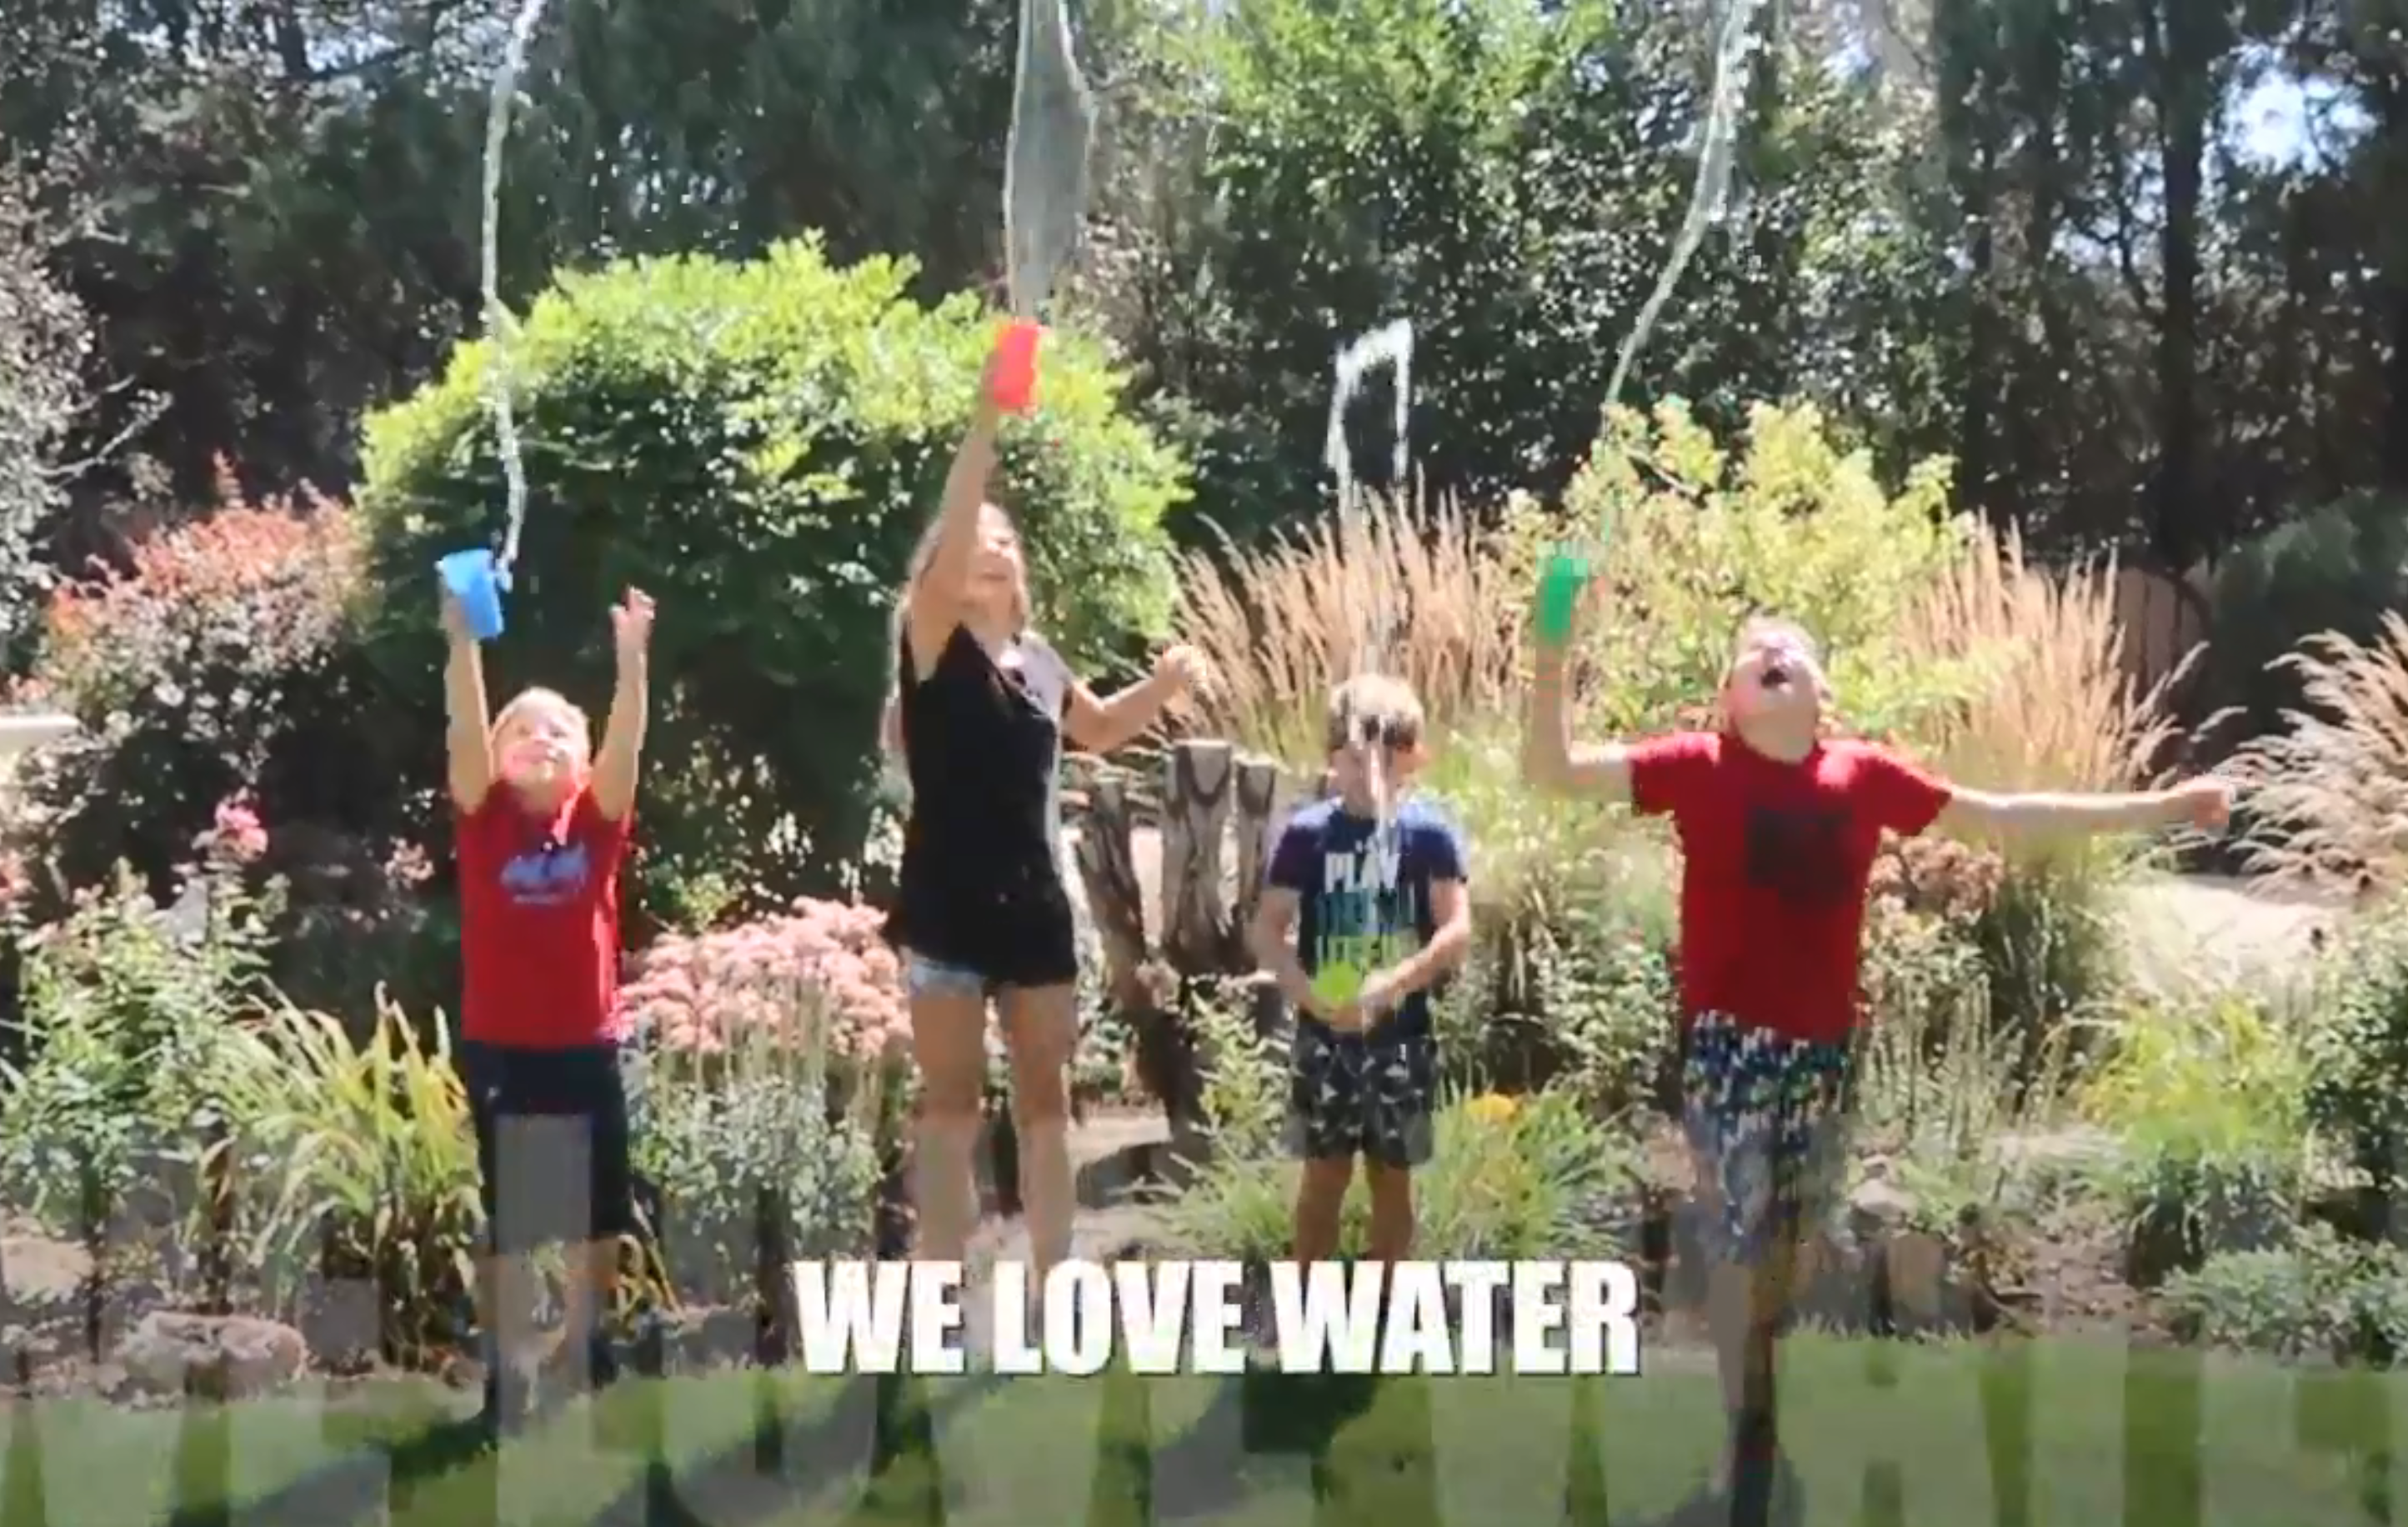 Four children jump in the air as they throw cups of water on each other.